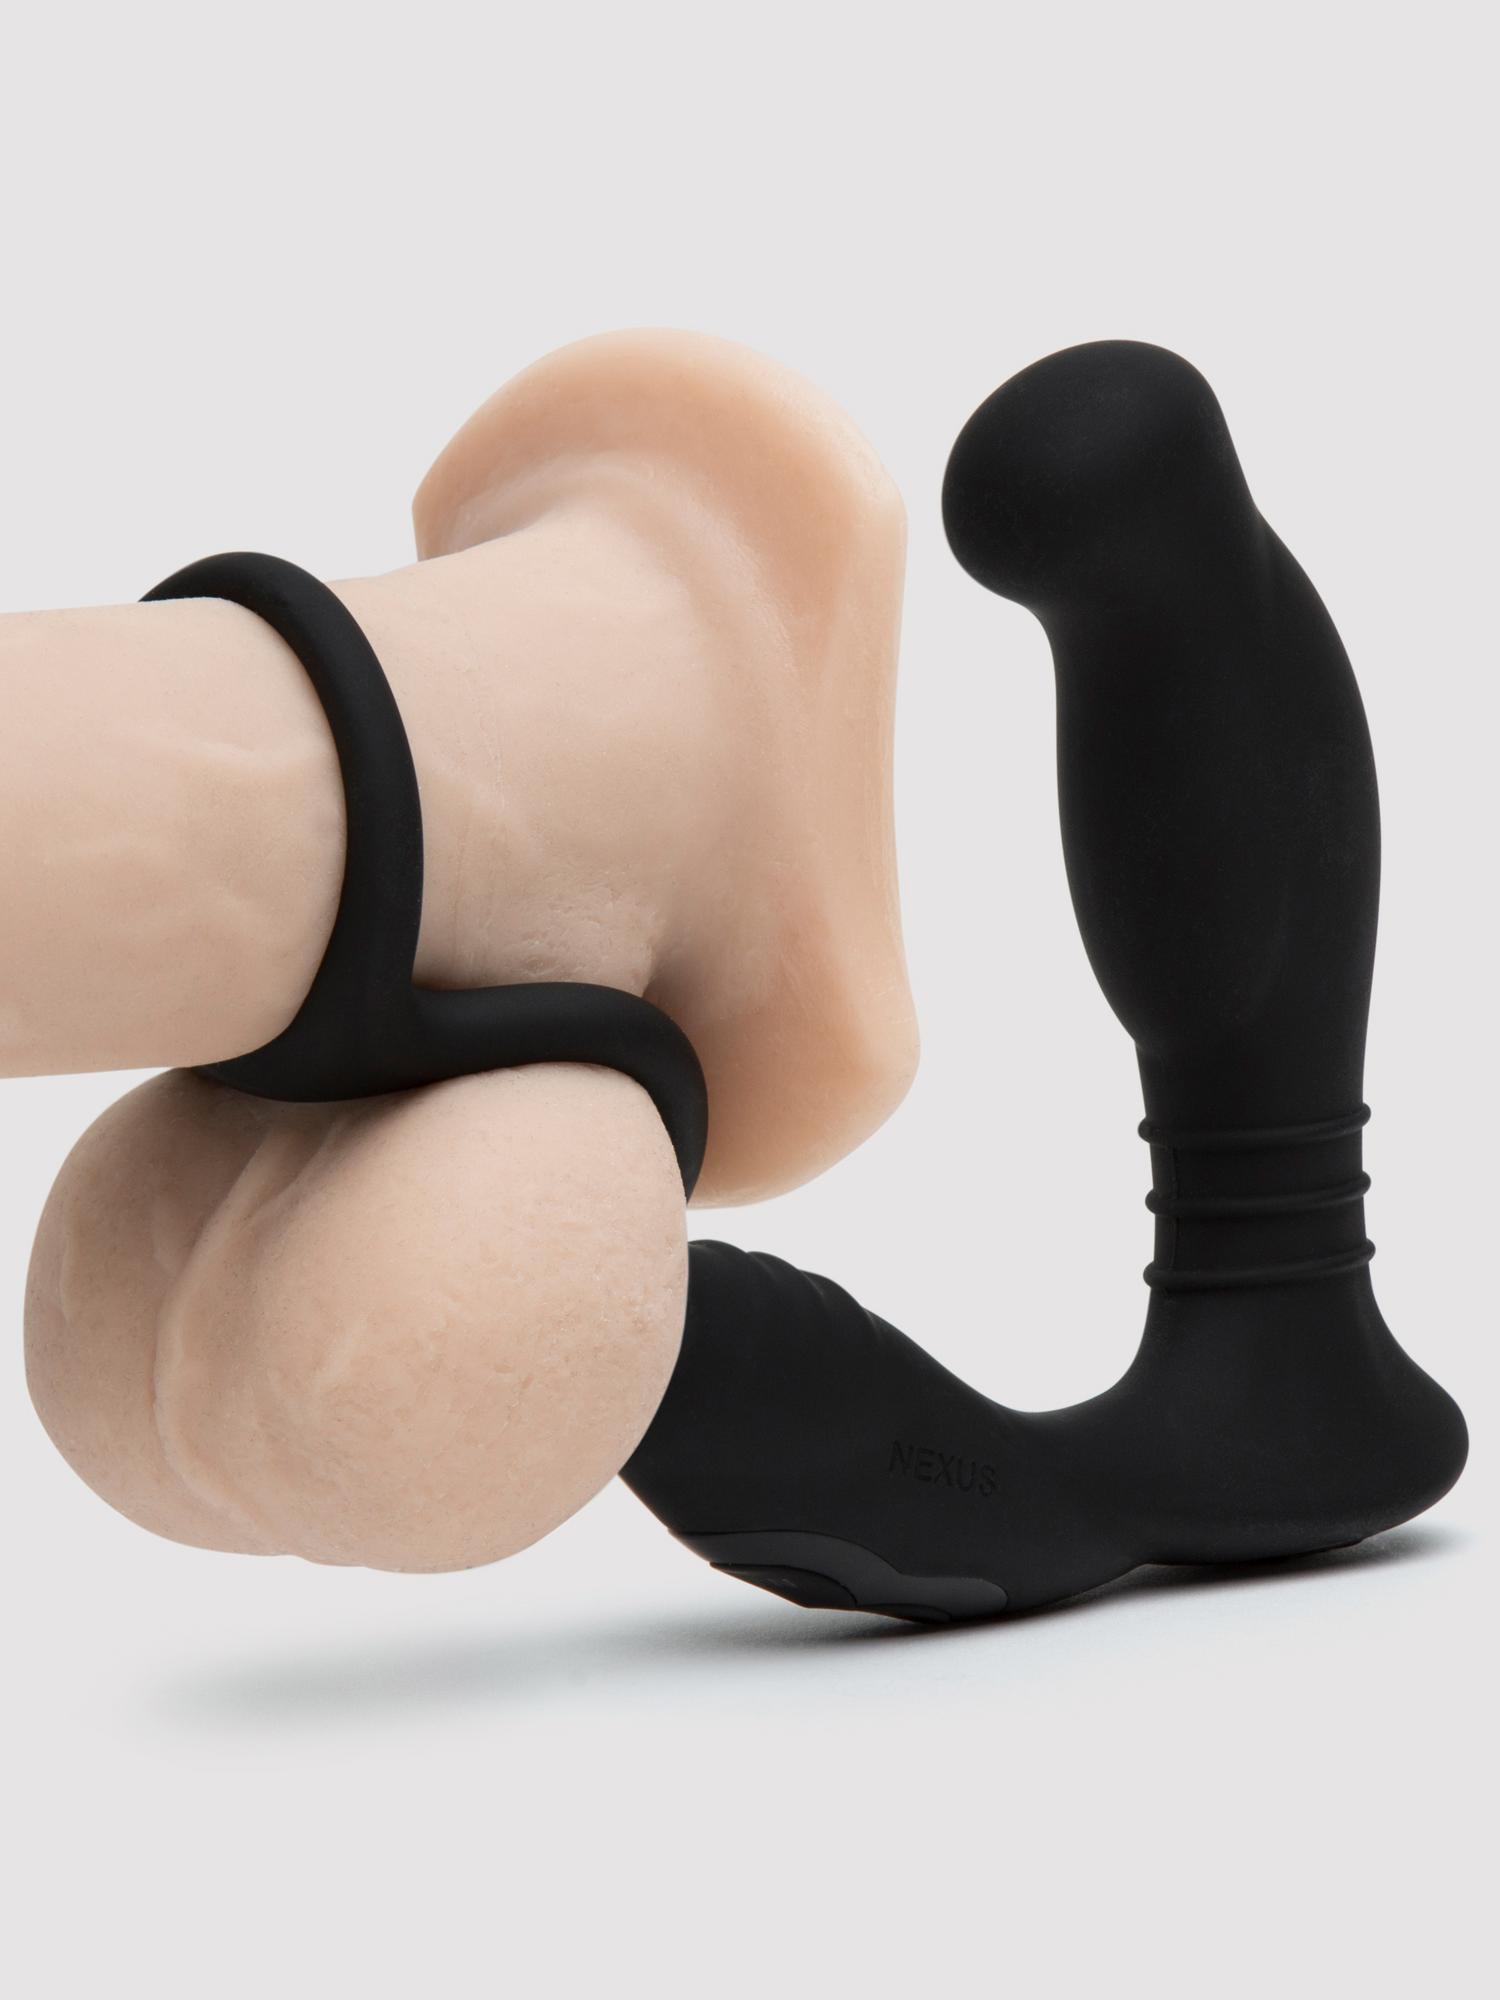 Cock rings with a butt plug